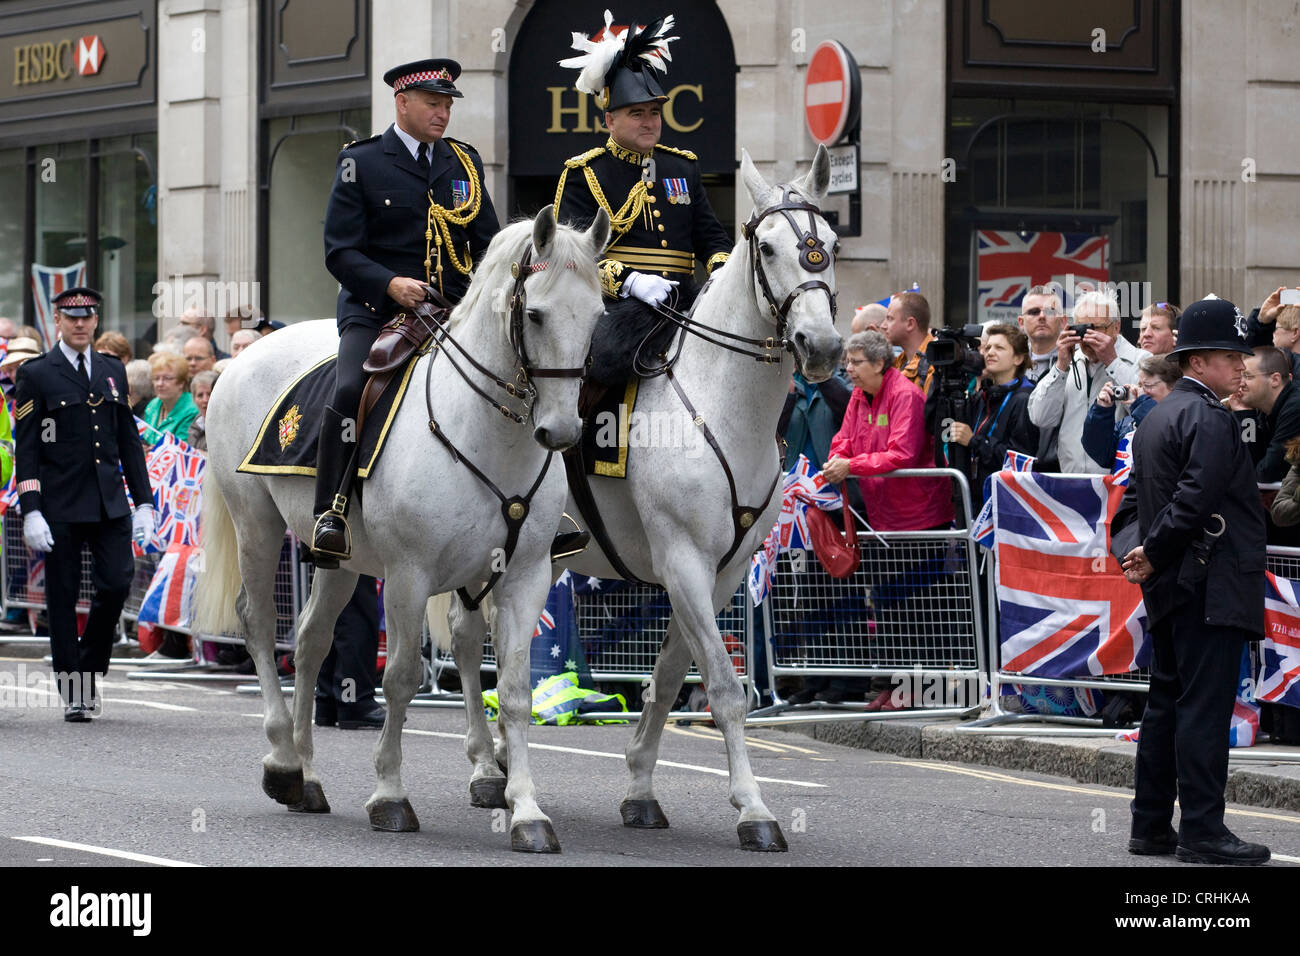 chief inspector of the London Metropolitan Police force on Horseback riding in ceremonial dress from st pauls Cathedral London Stock Photo